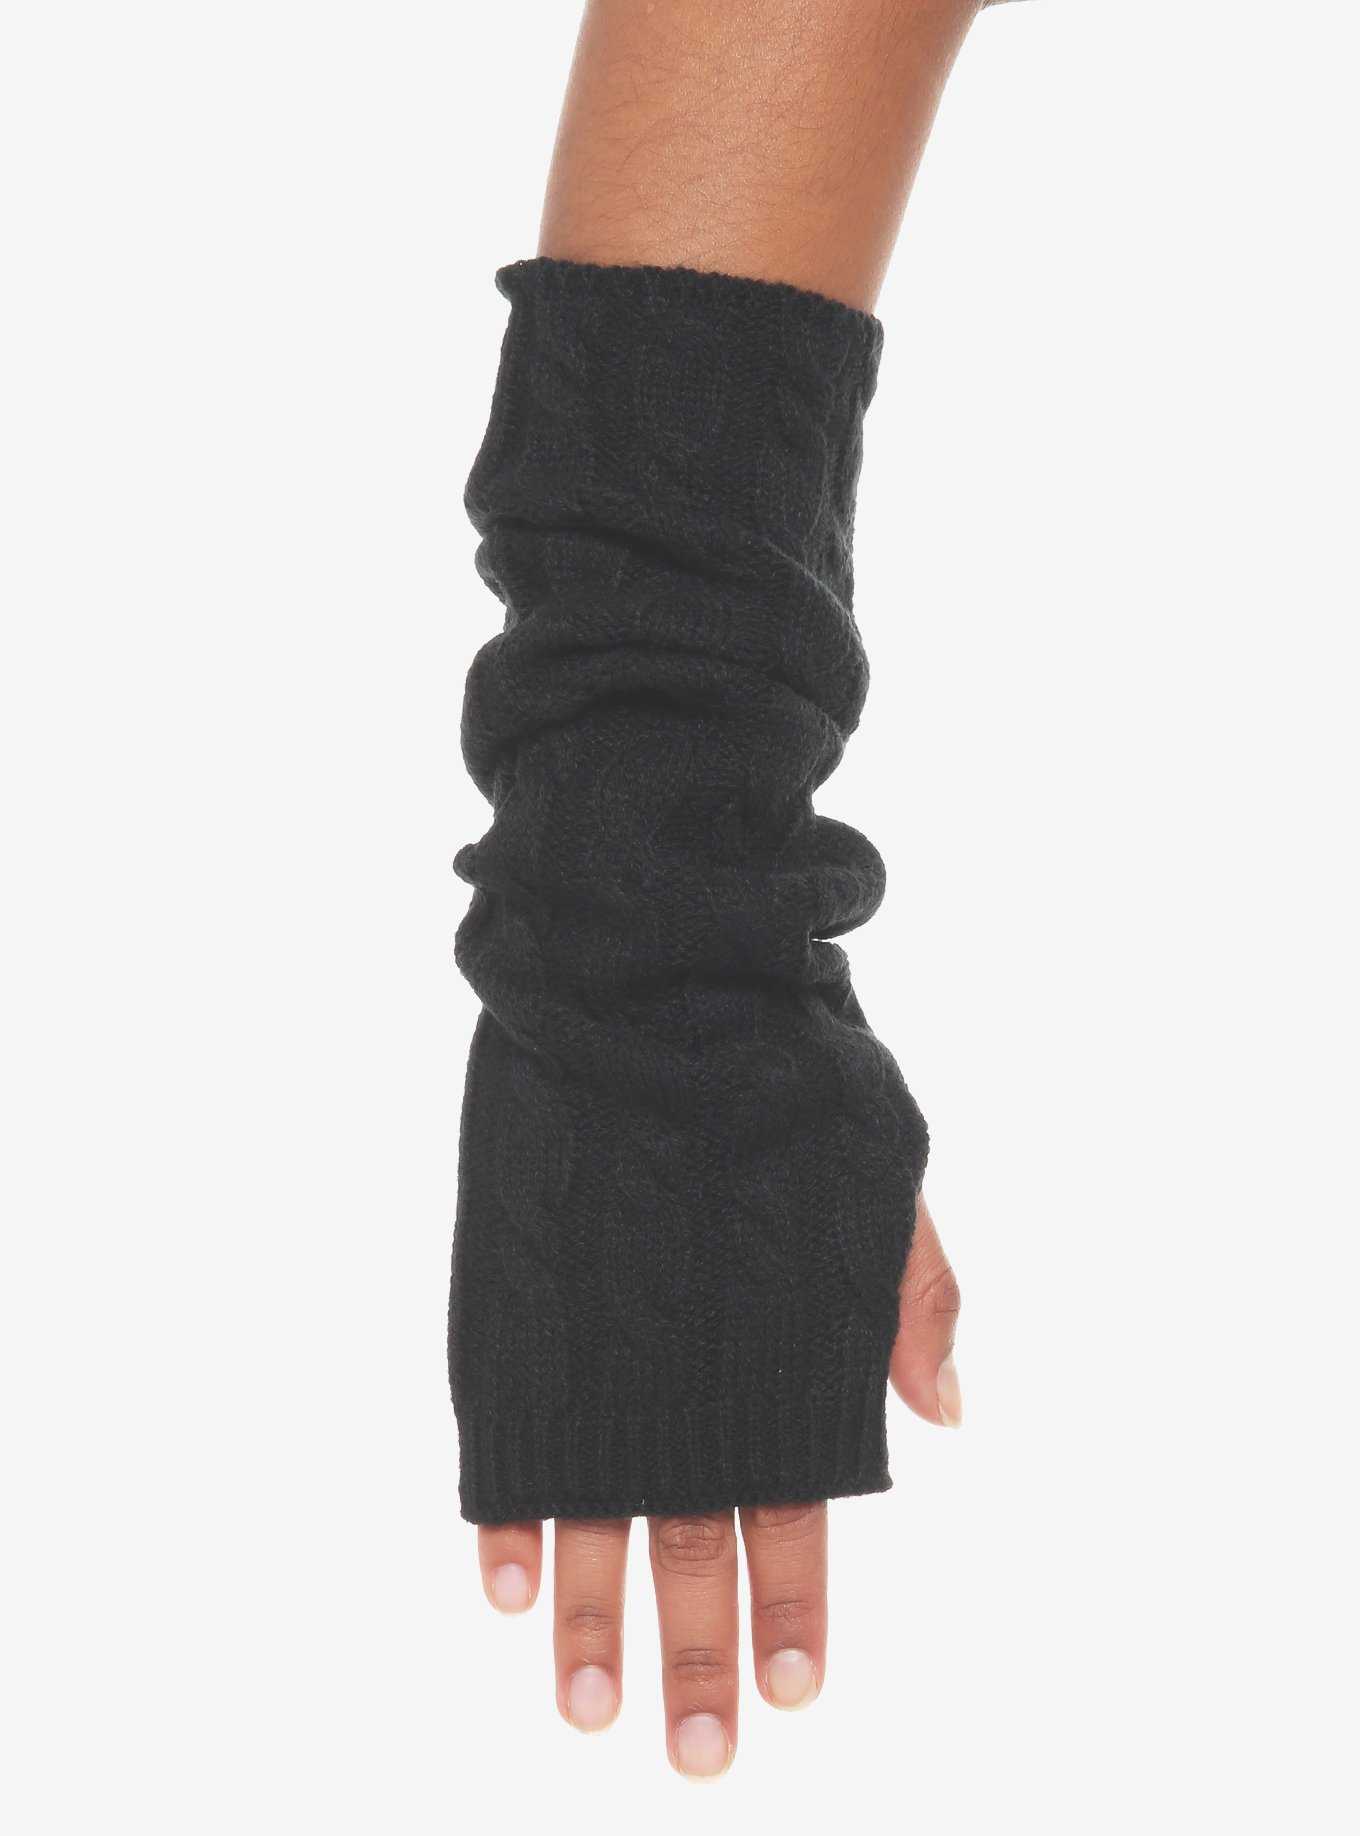 Black Cable Knit Arm Warmers, , hi-res